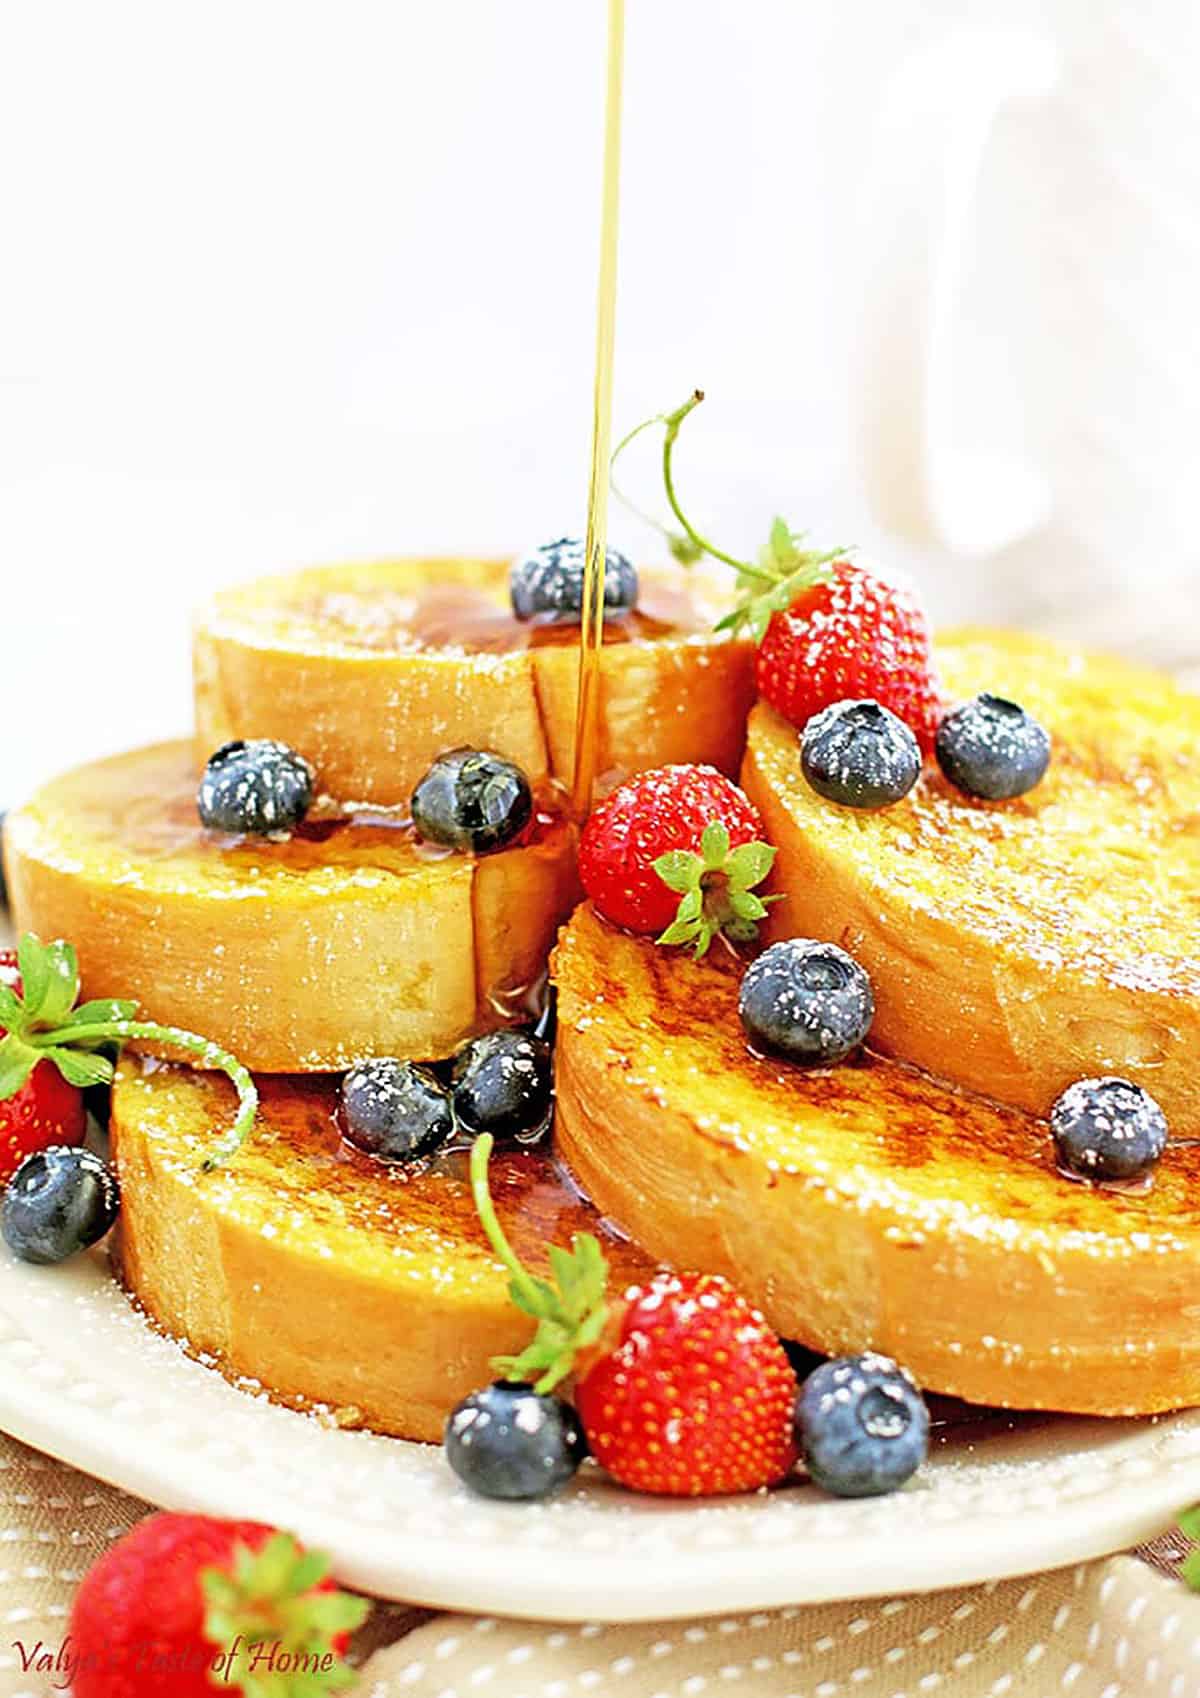 This Mom's French Toast Recipe is made out of homemade French bread slices dipped in a tasty combination of home-raised eggs, sugar, salt, and vanilla mixture, sautéed in butter make them taste so scrumptious, pillow-soft, that melt in your mouth in sweet delight.